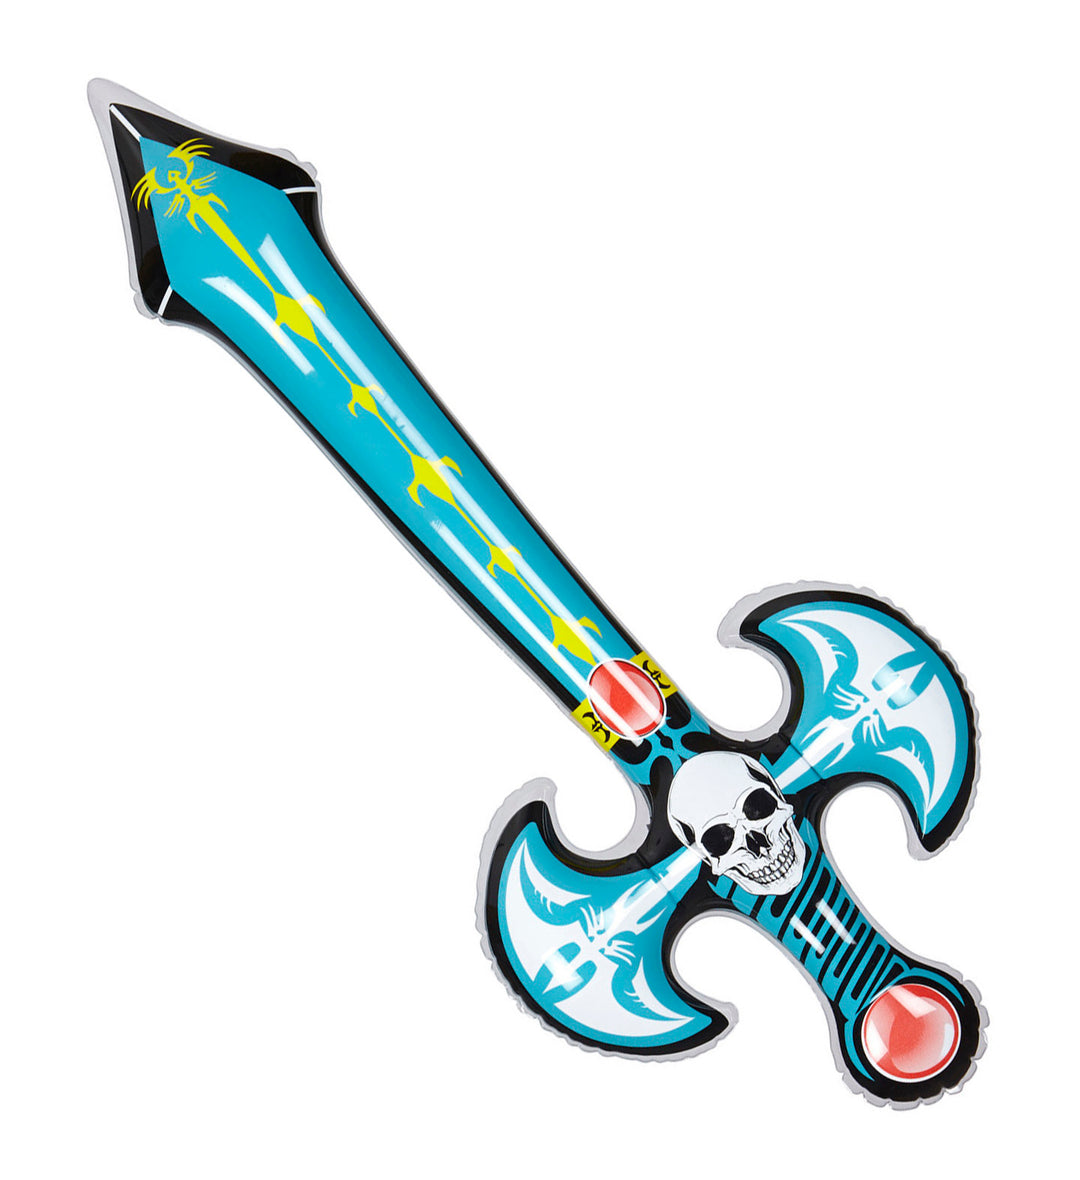 INFLATABLE DEATH SWORD 80 cm